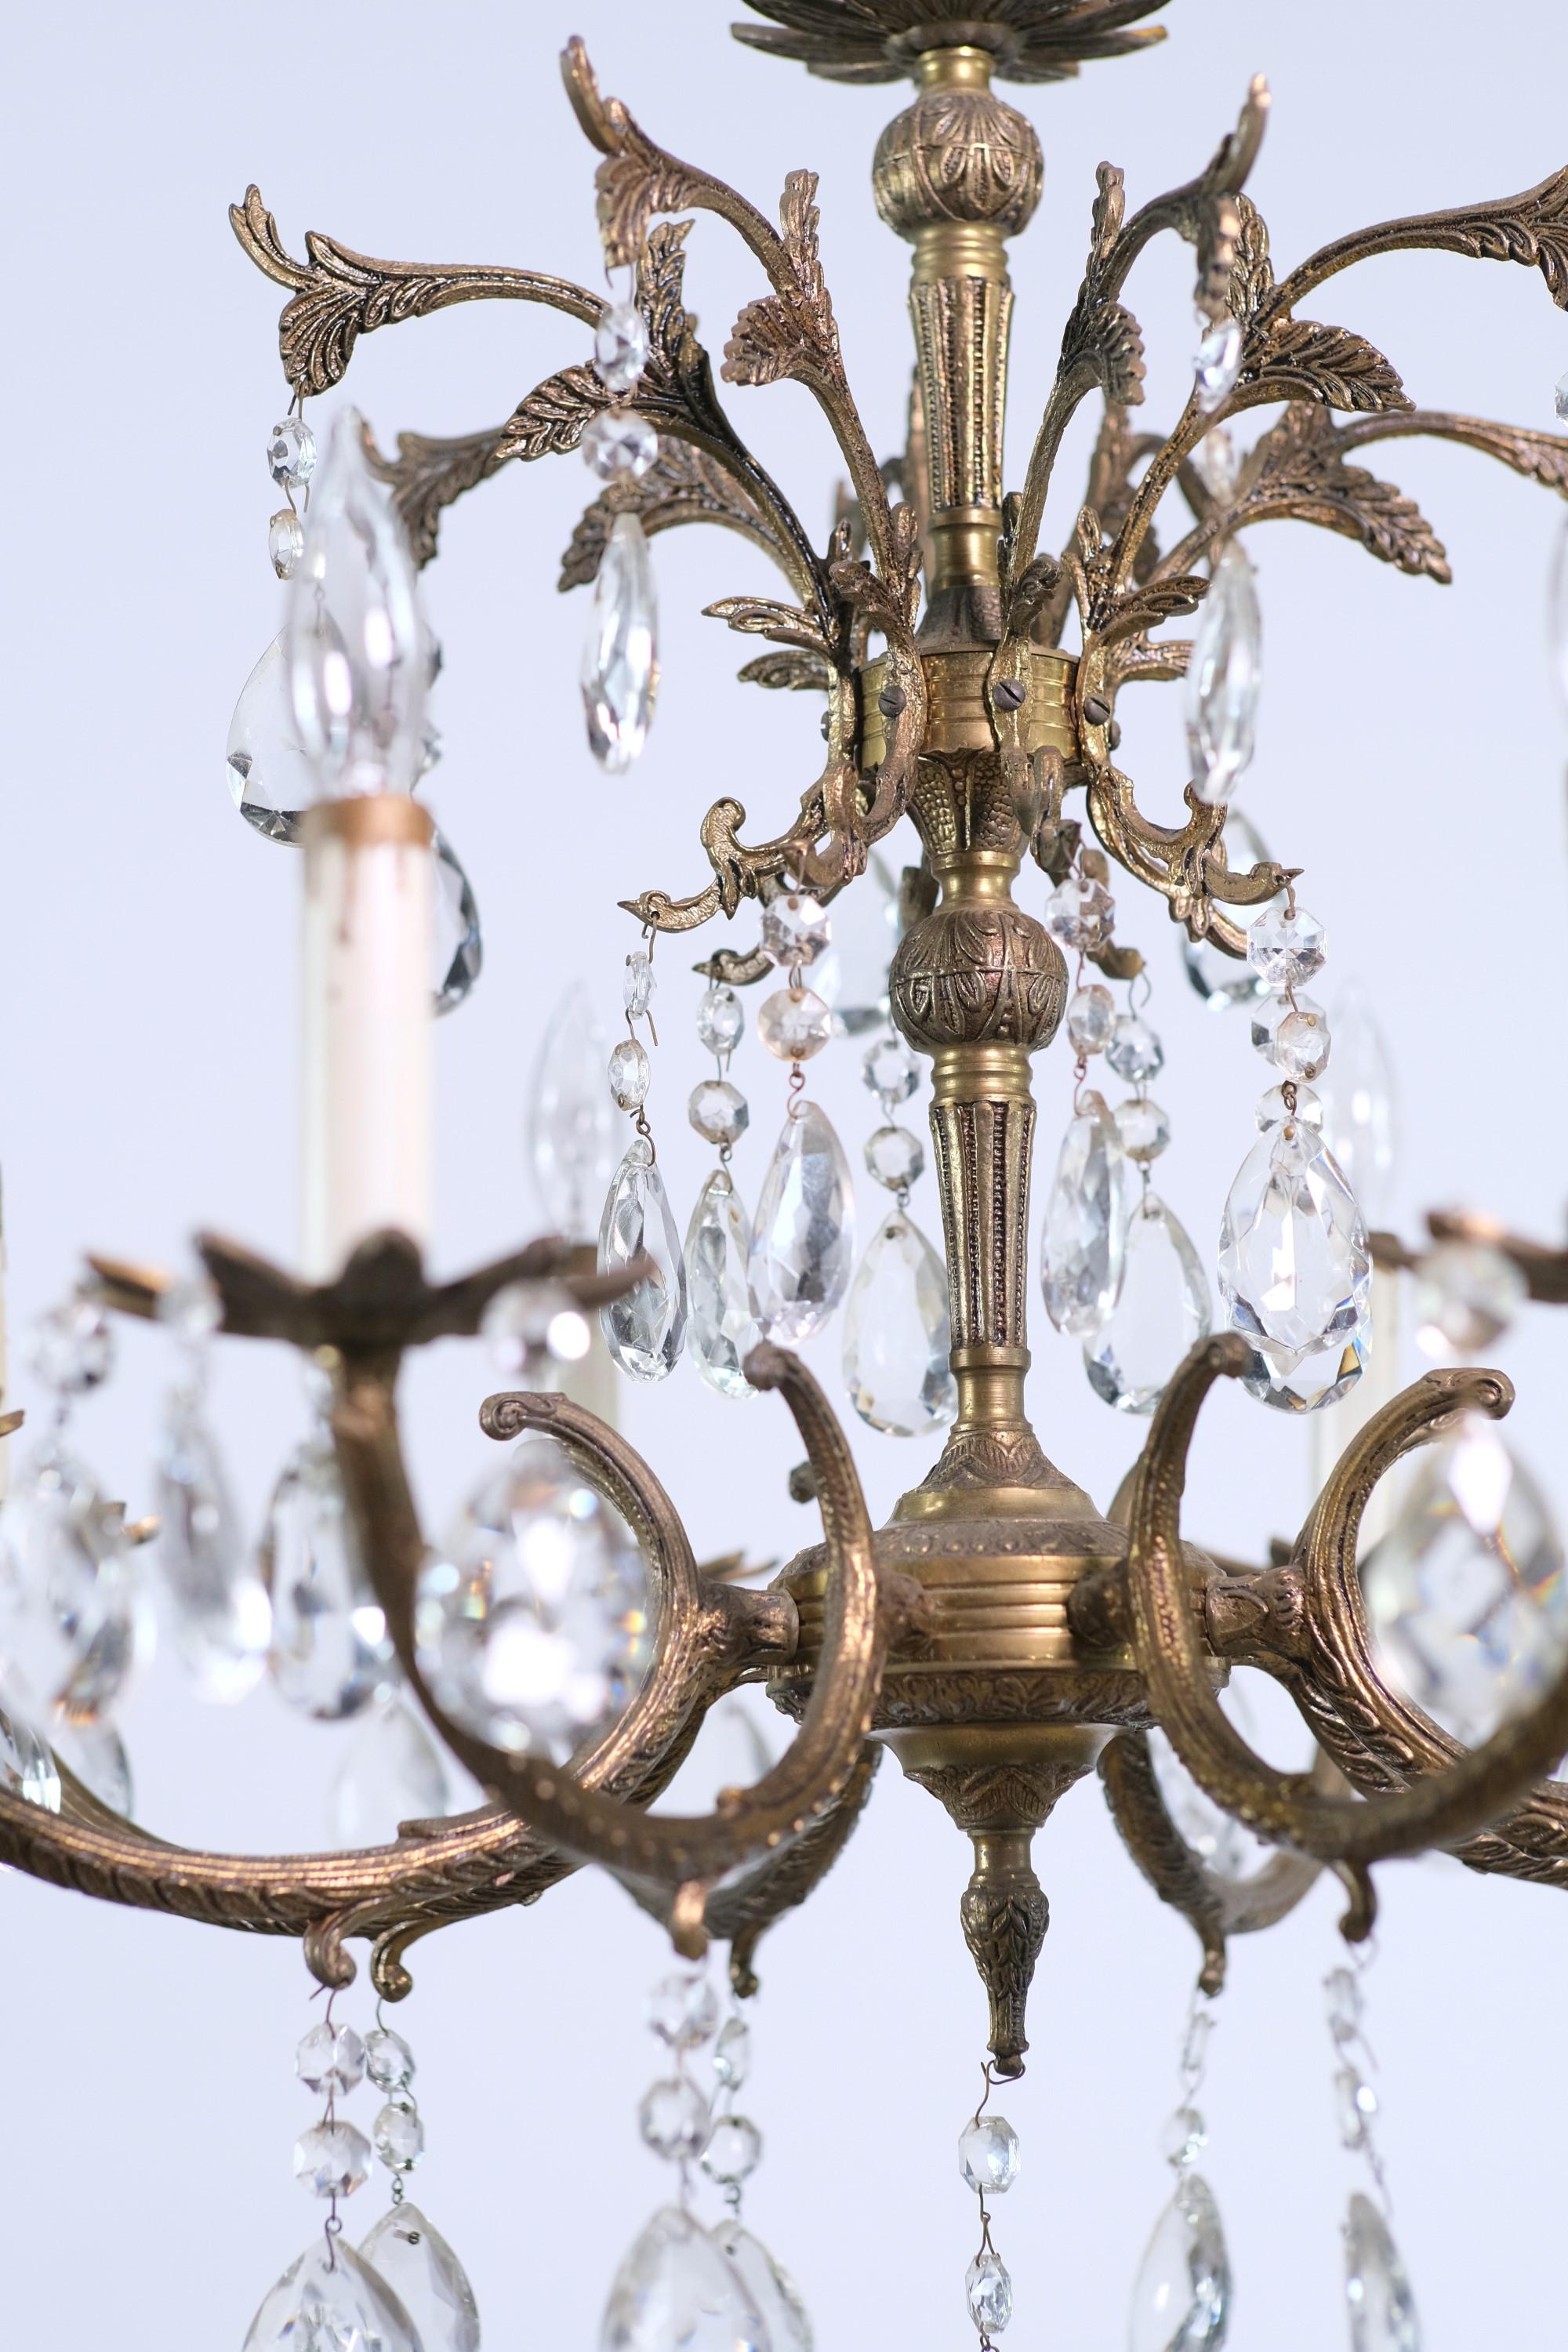 Antique early 20th Century small scale bronze finish chandelier. Each of the 8 arms takes one candelabra size light bulb. This can be seen at our 400 Gilligan St location in Scranton, PA.